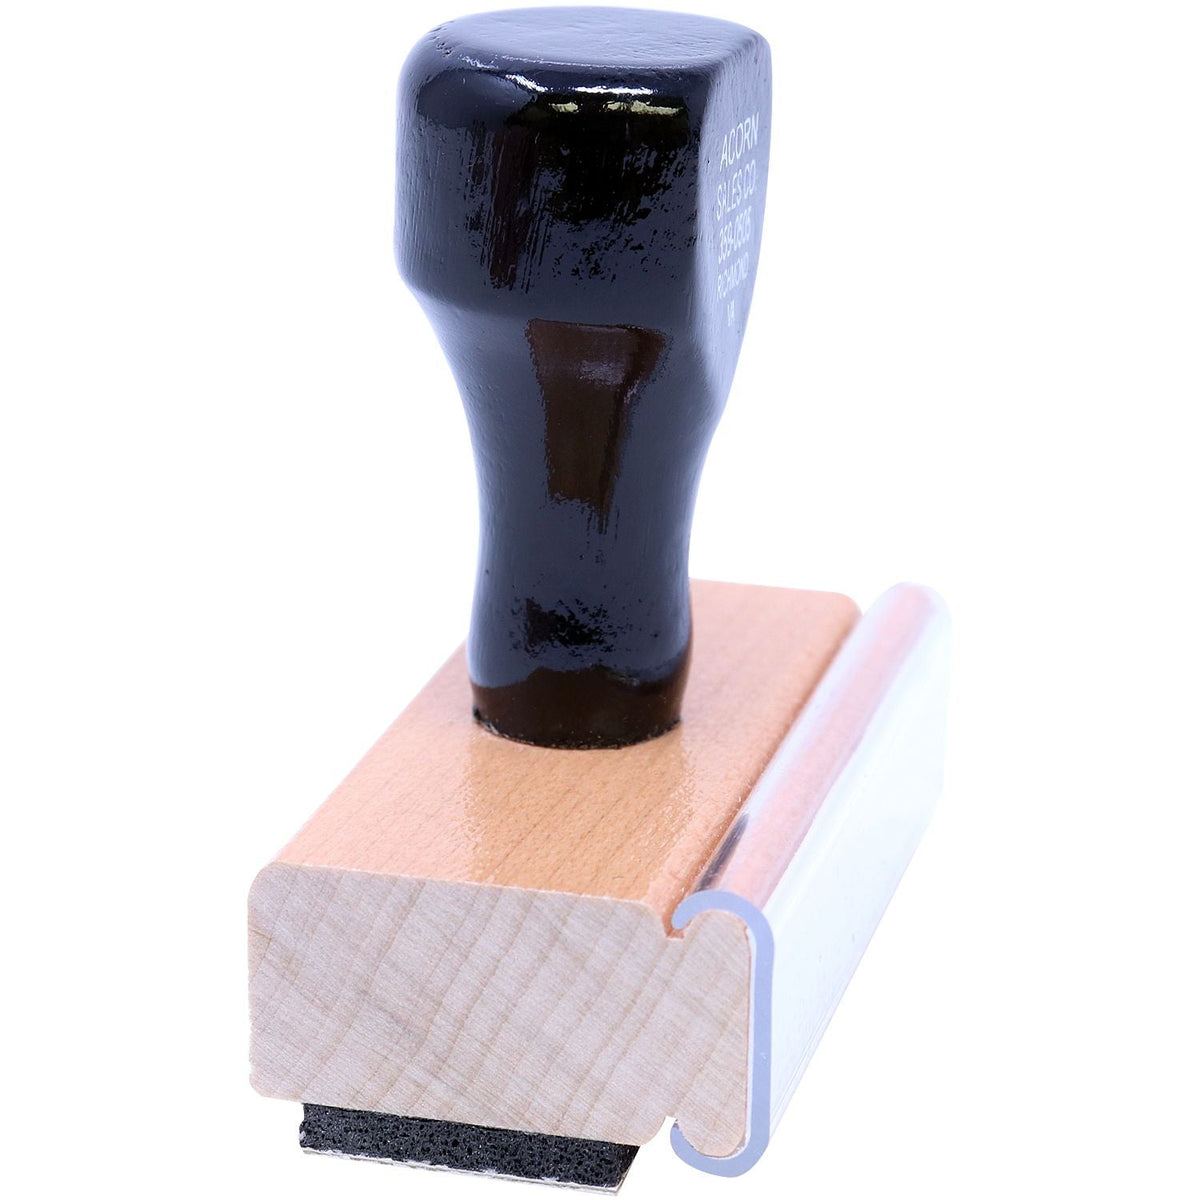 Side View of Large Judges Copy Rubber Stamp at an Angle